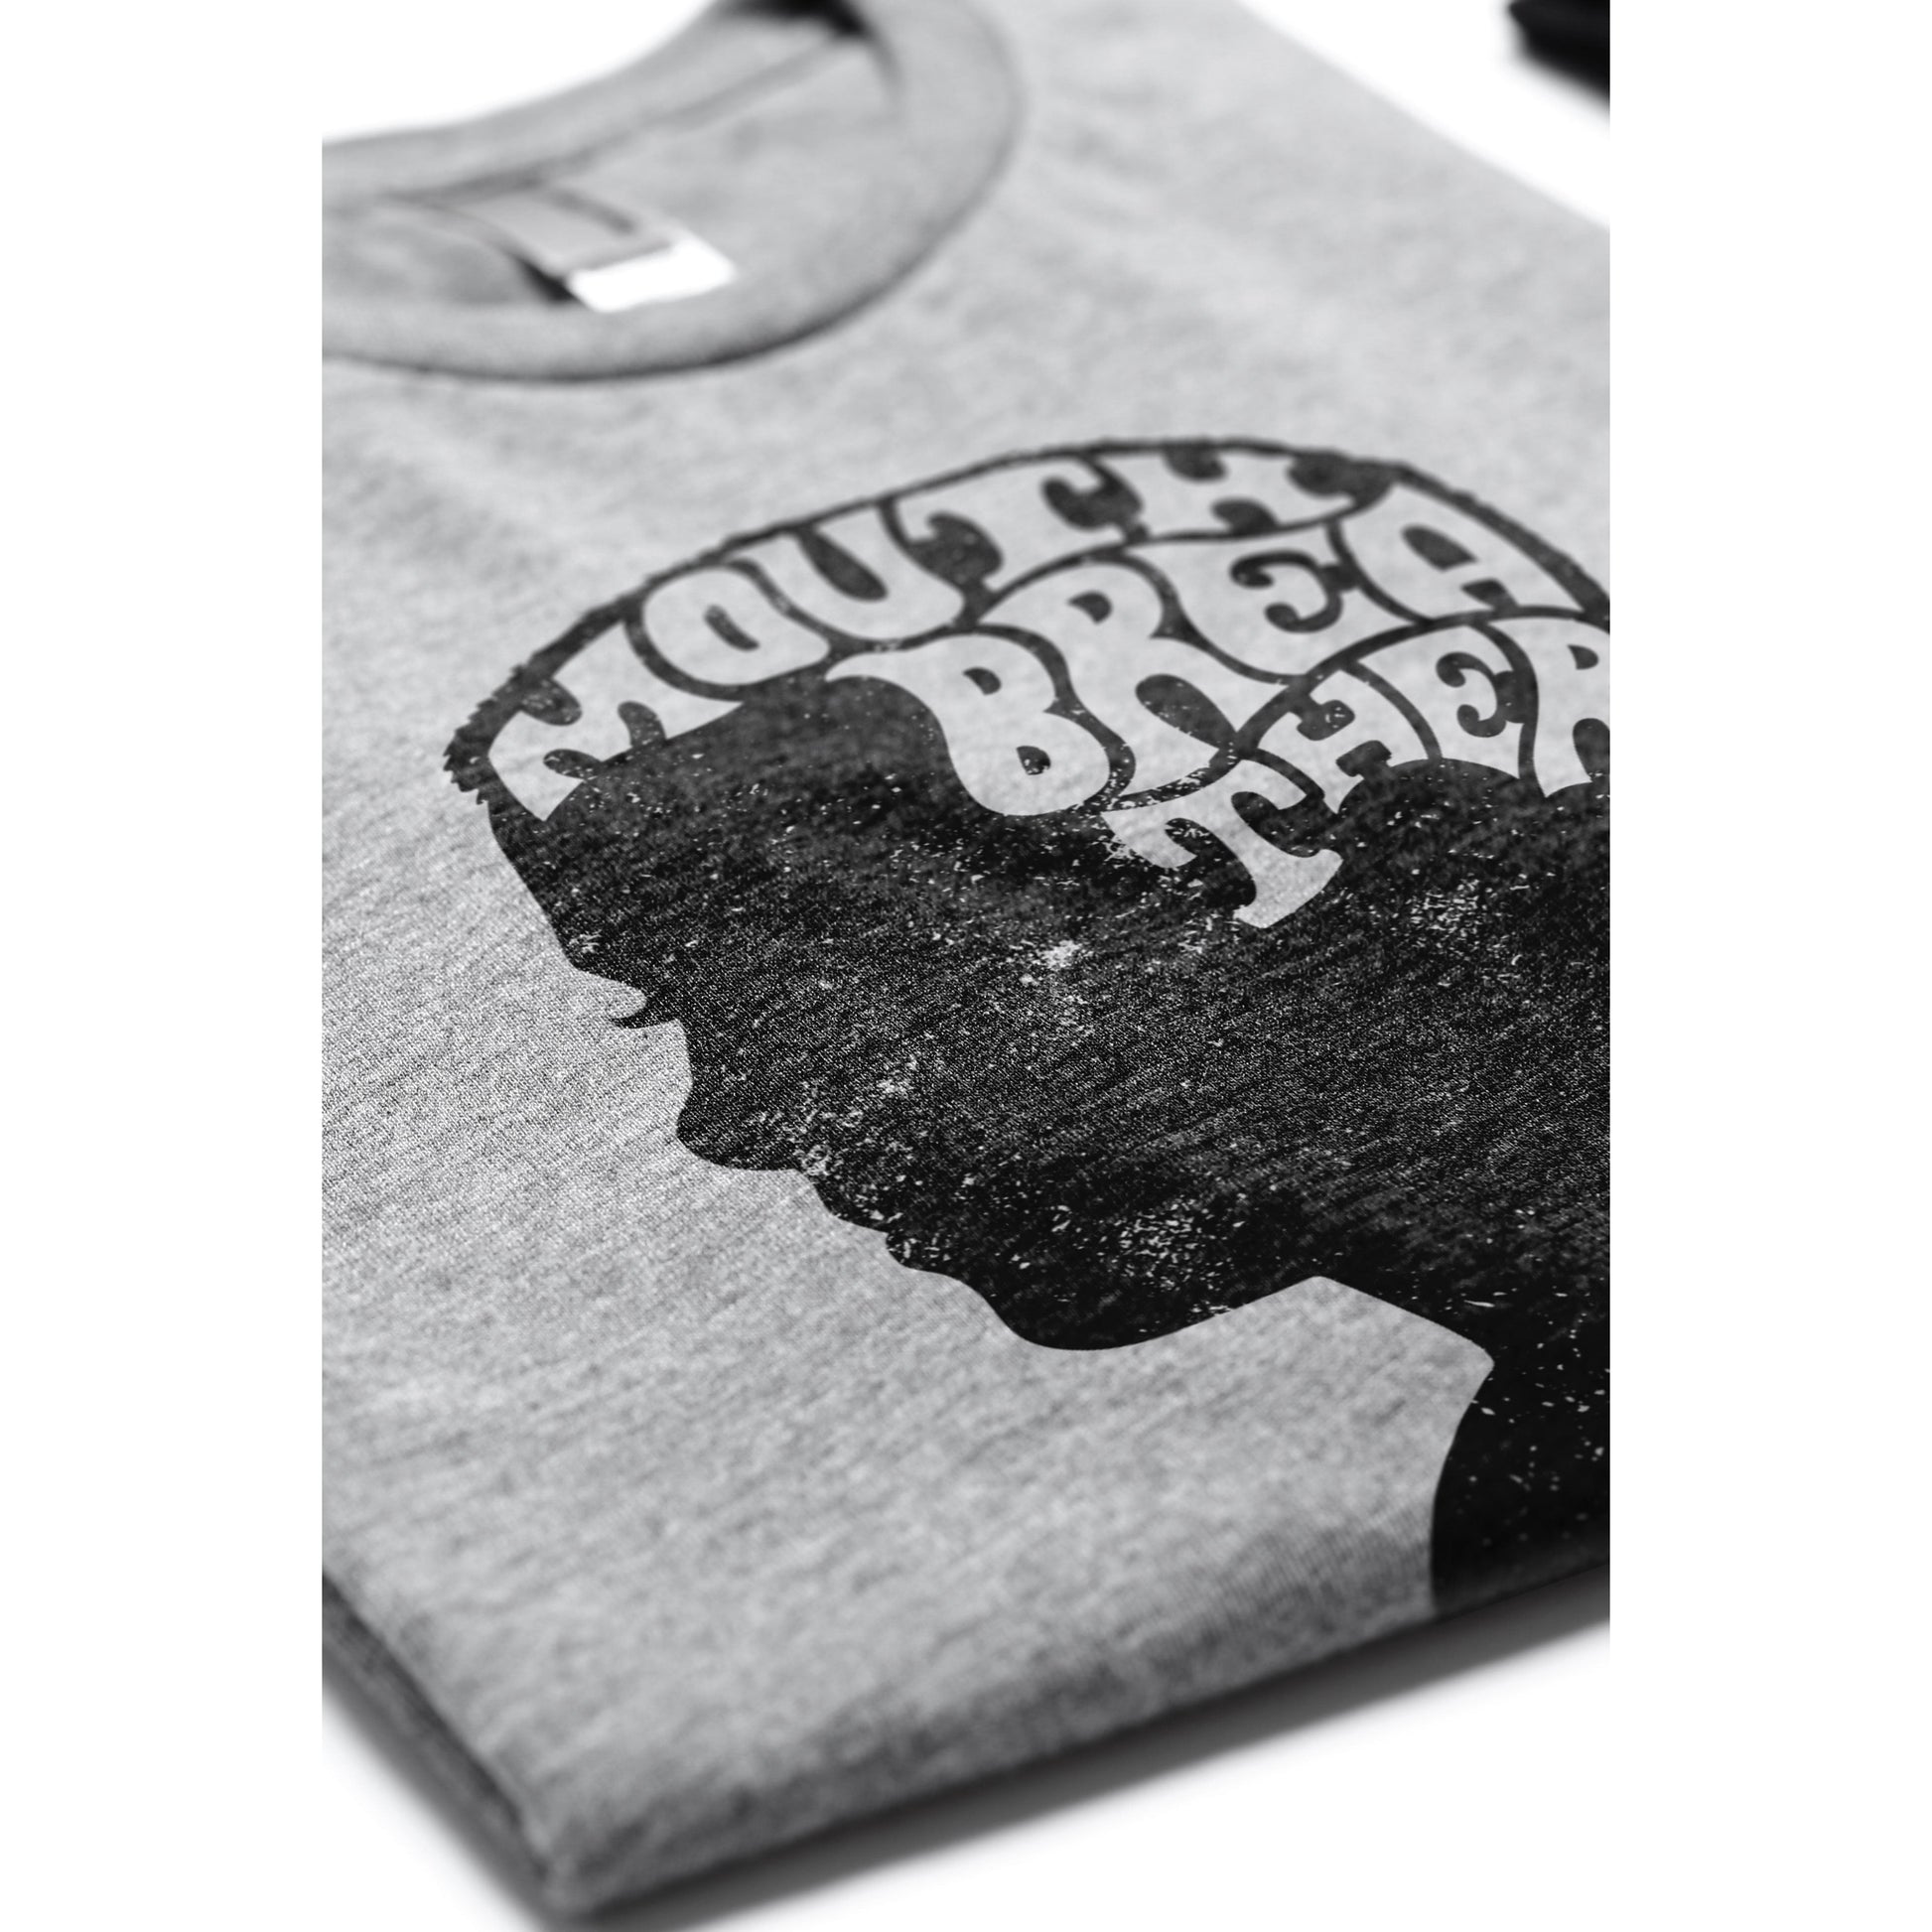 Mouthbreather Printed Graphic Men's Crew T-Shirt Grey Closeup Image